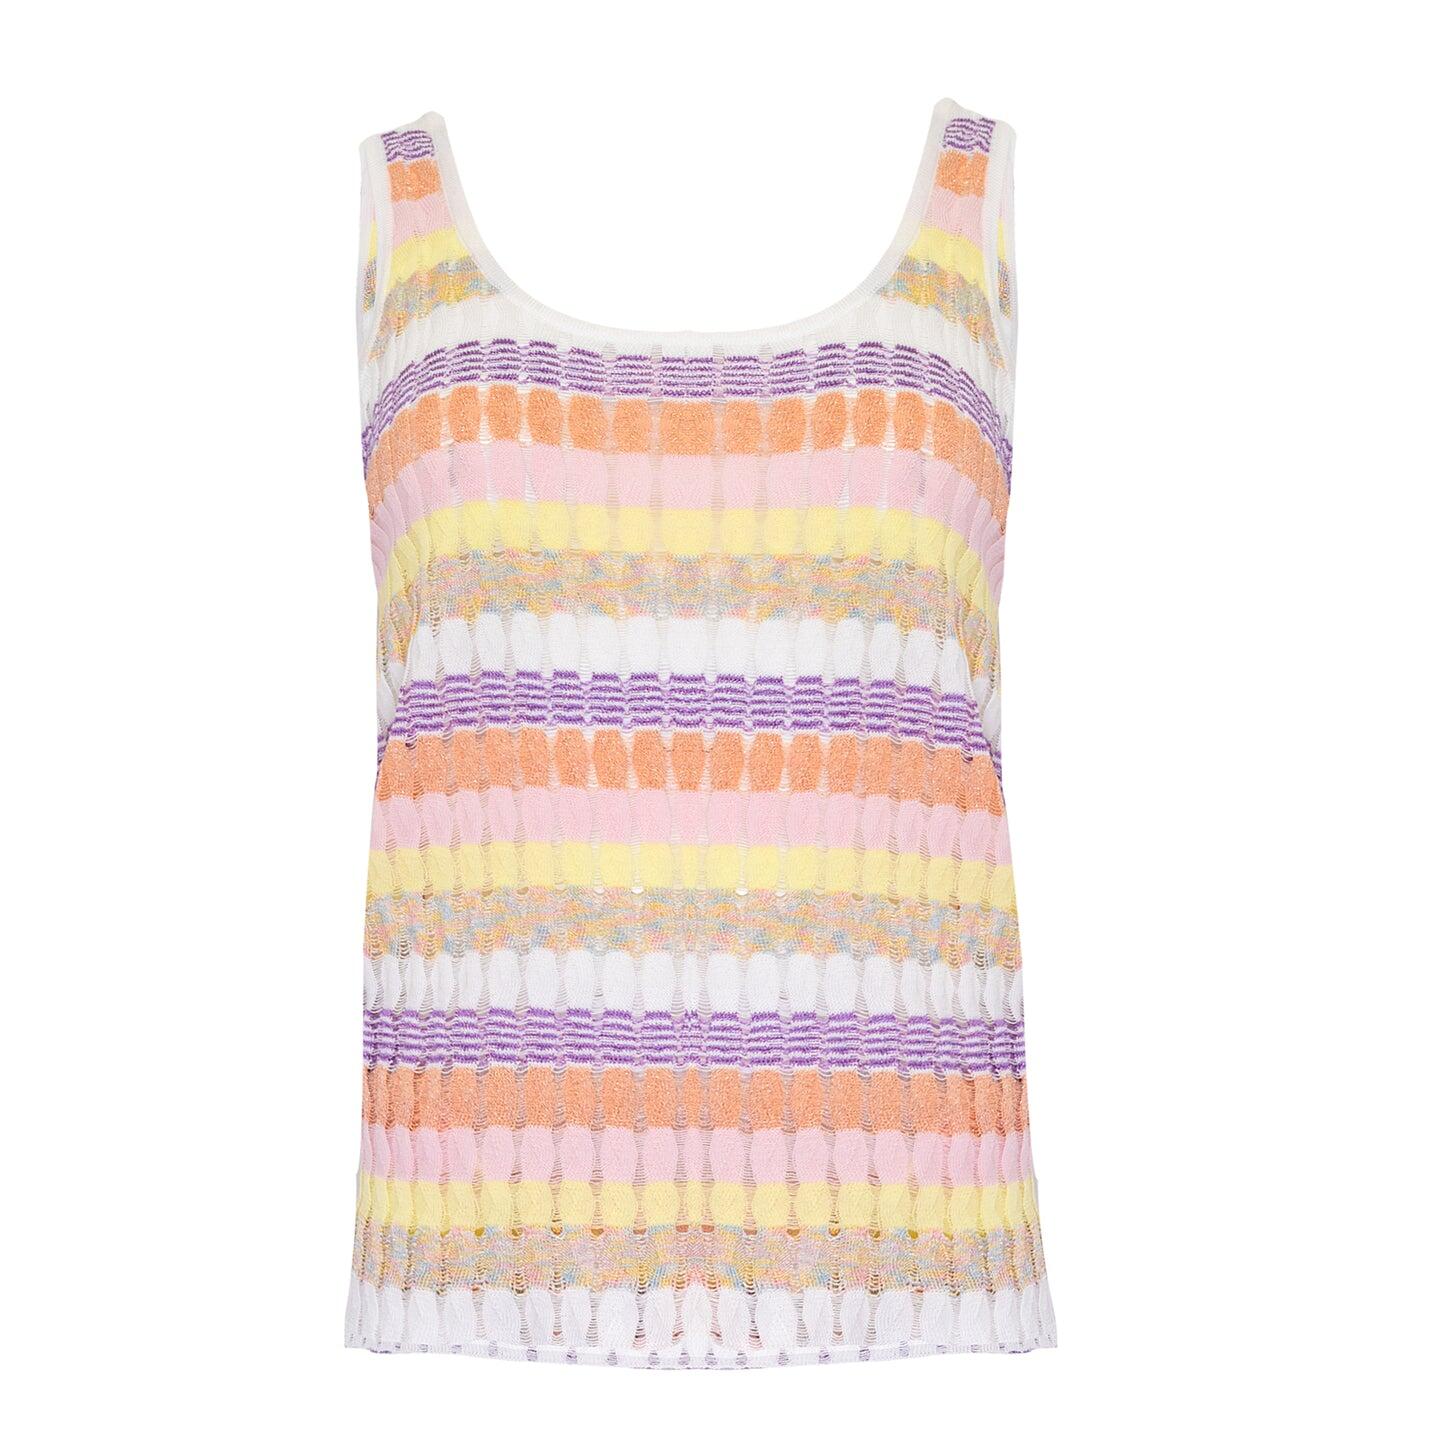 Tank Top in Racking Knit White/Pink/Peach